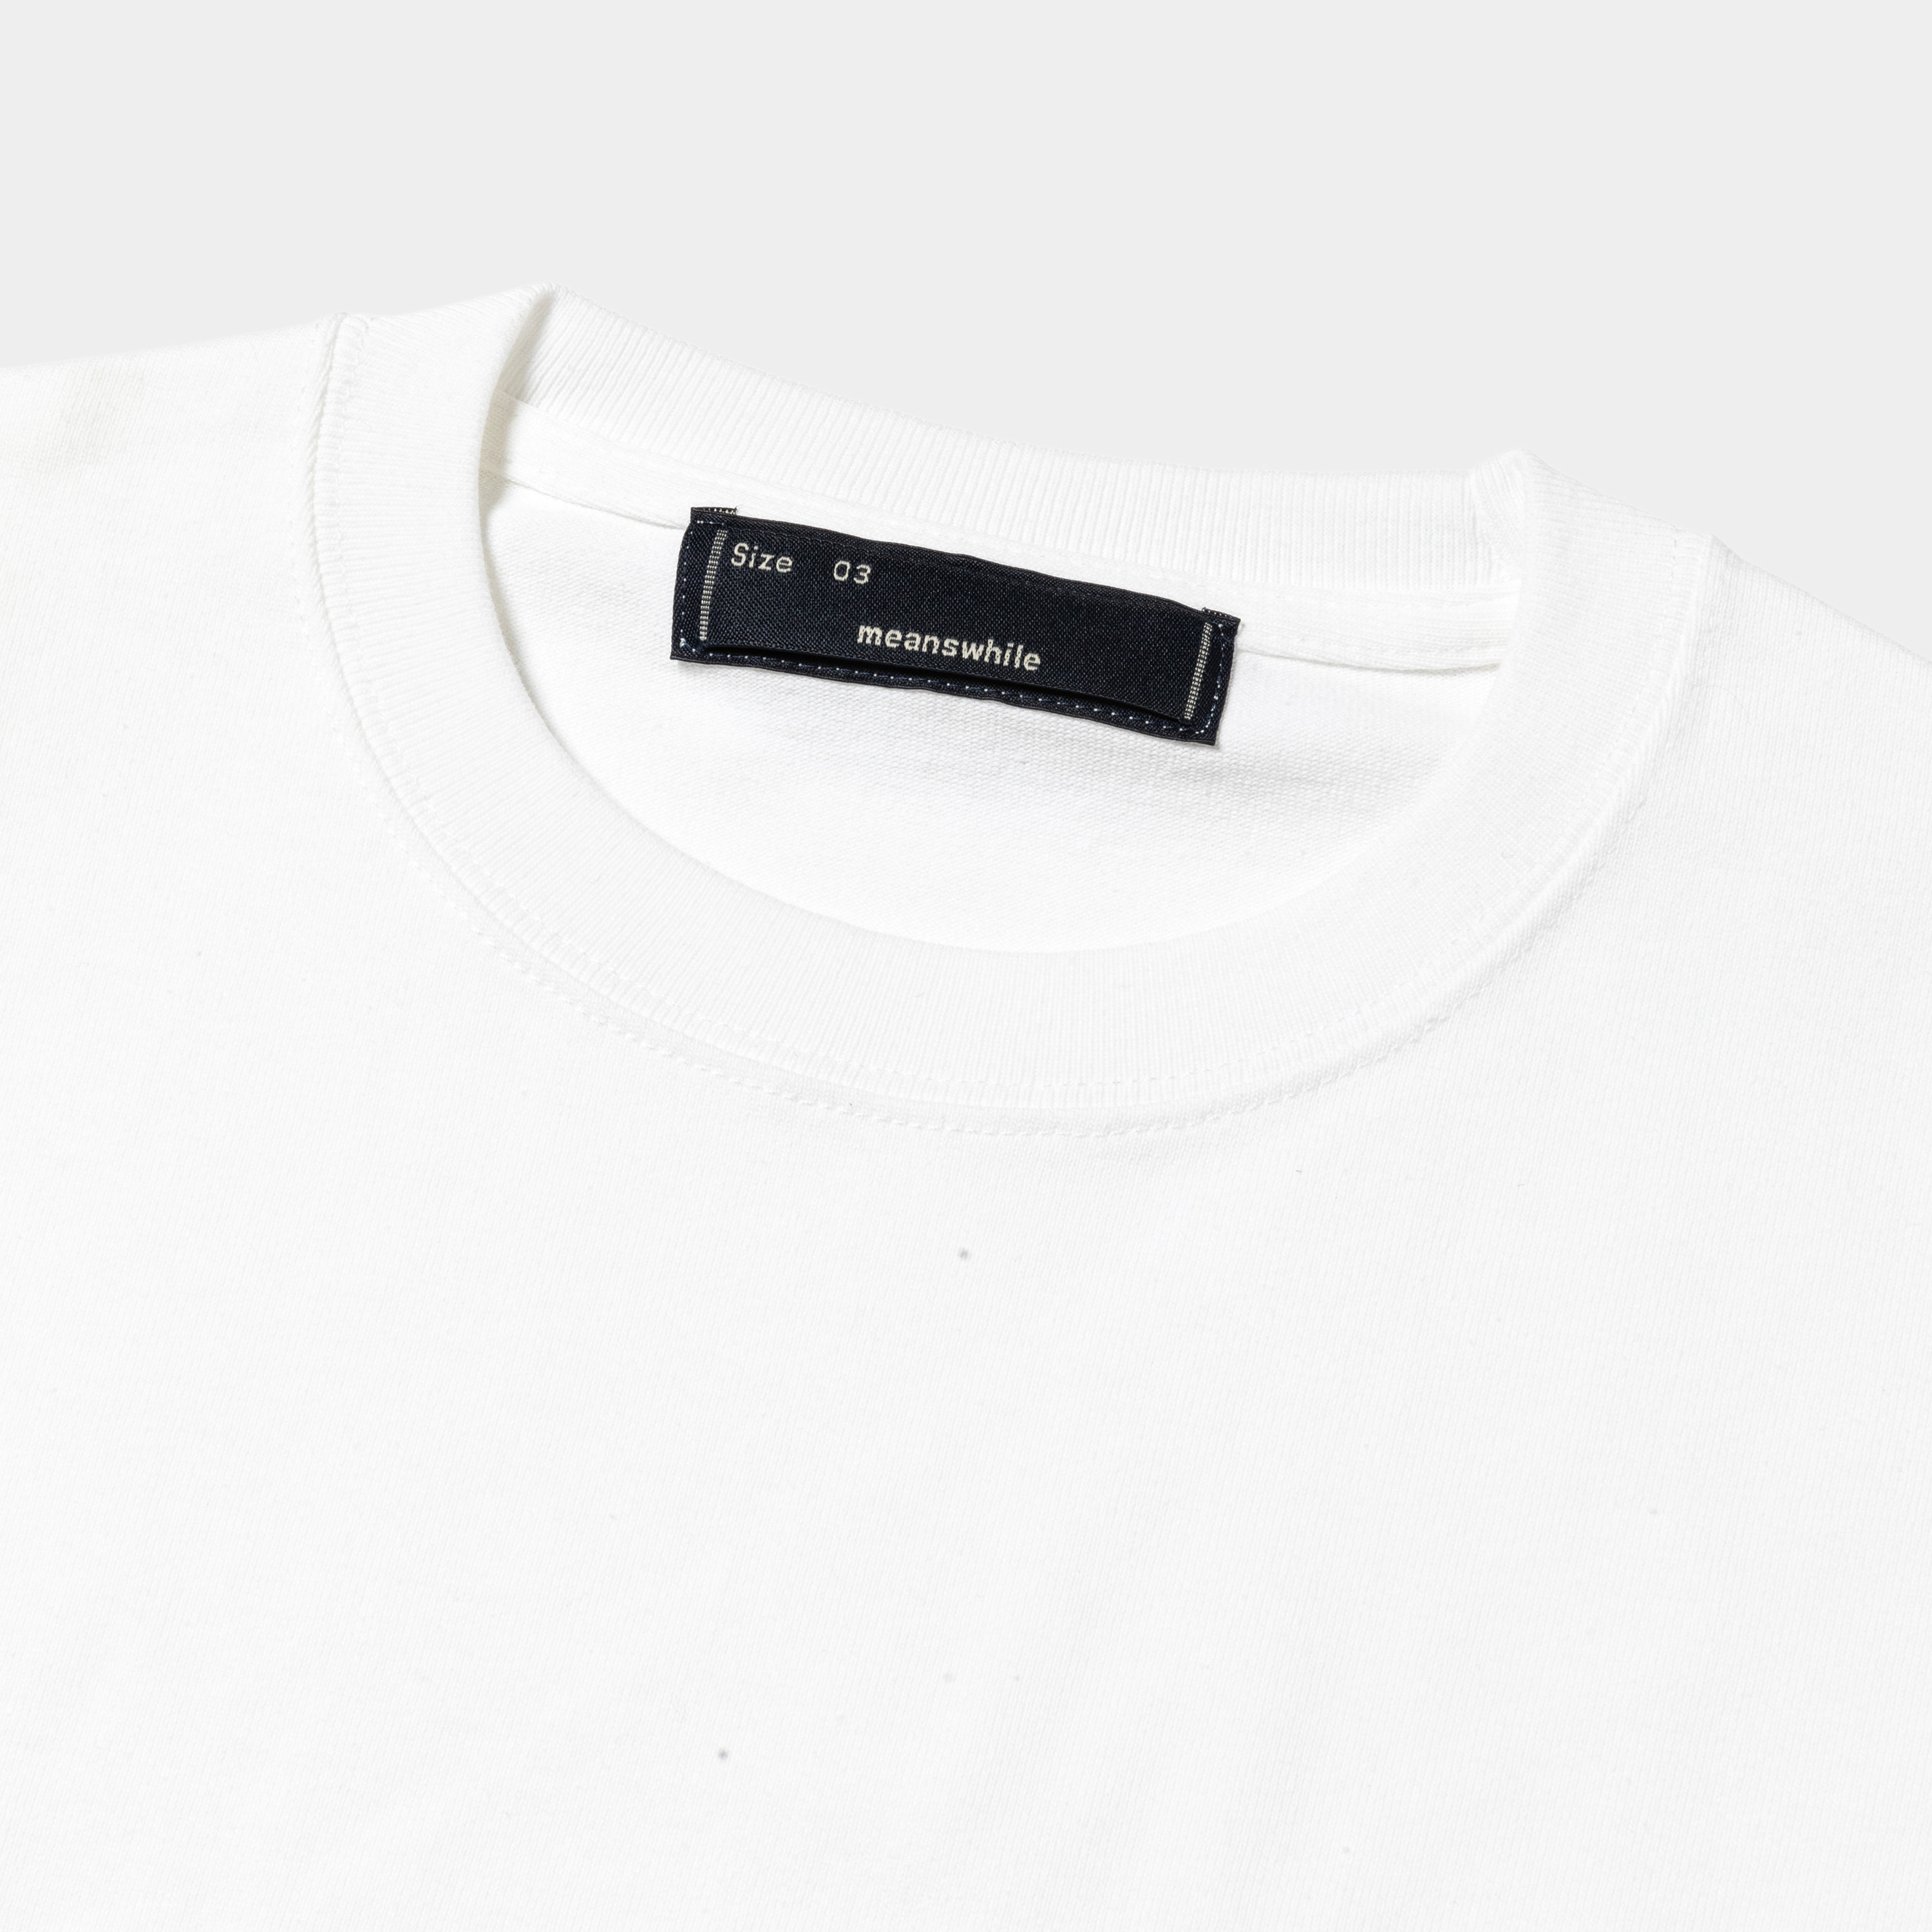 Abstract Photograph Tee/Off White